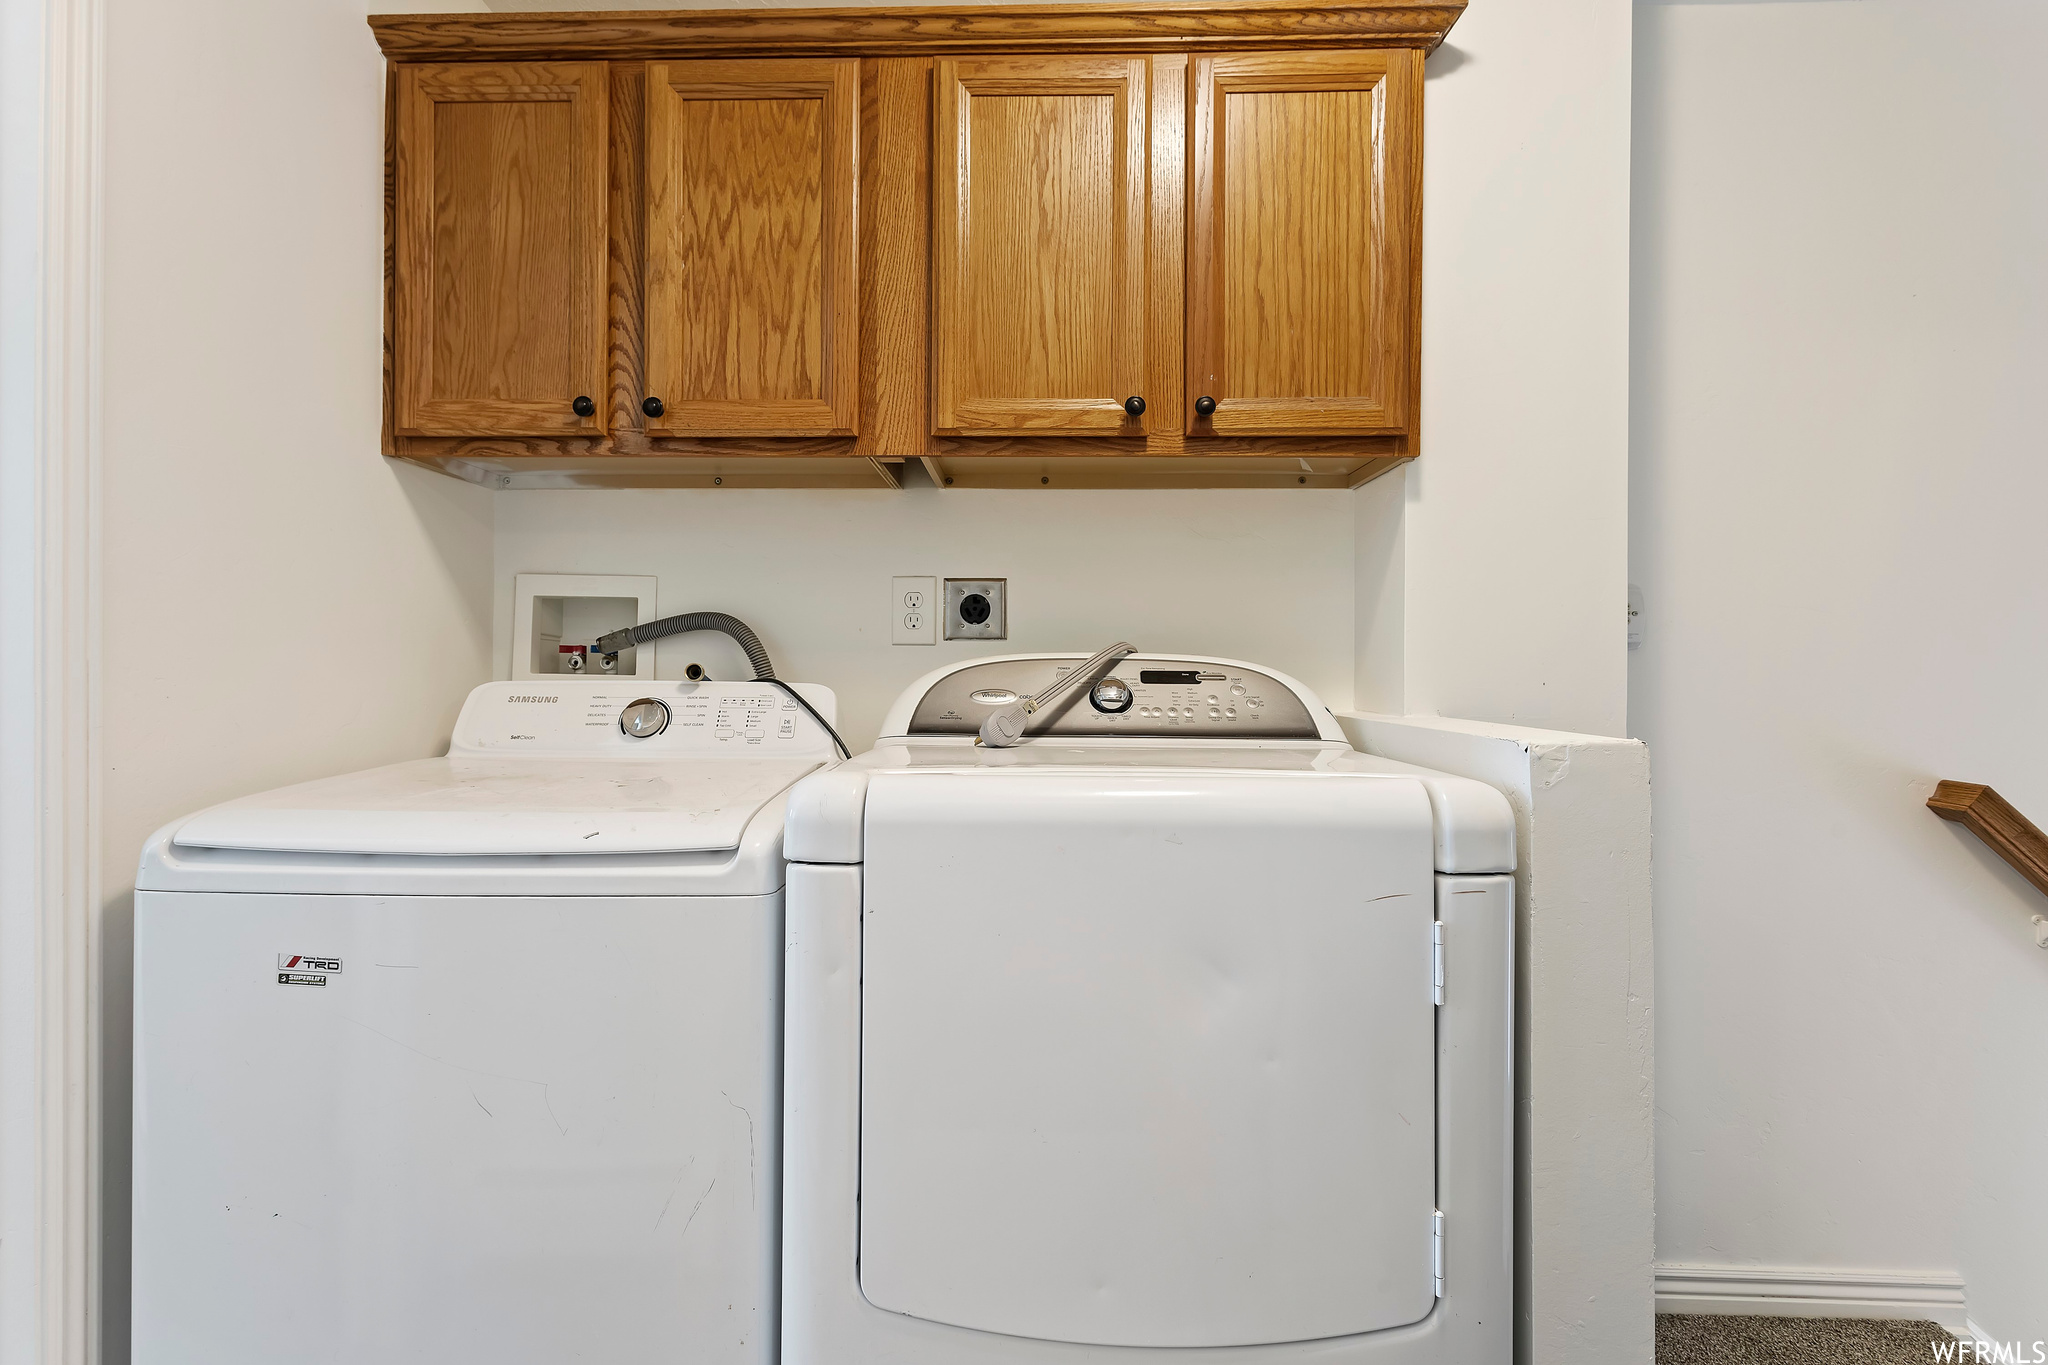 Laundry area featuring cabinets, washing machine and dryer, hookup for an electric dryer, and washer hookup